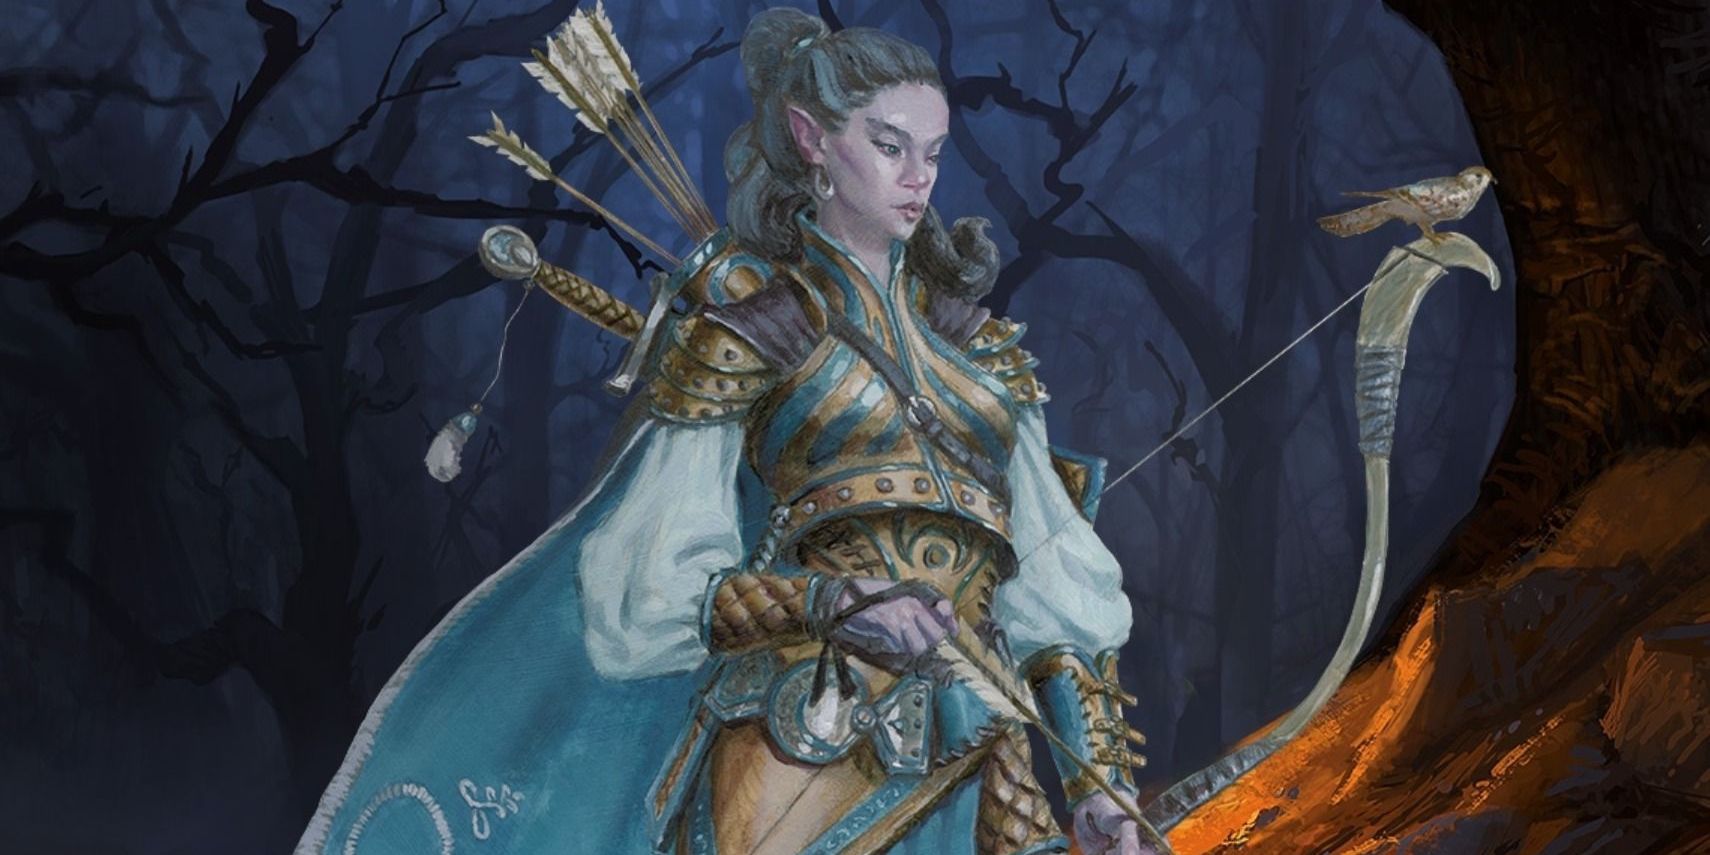 Art of an elven ranger with a quiver and bow